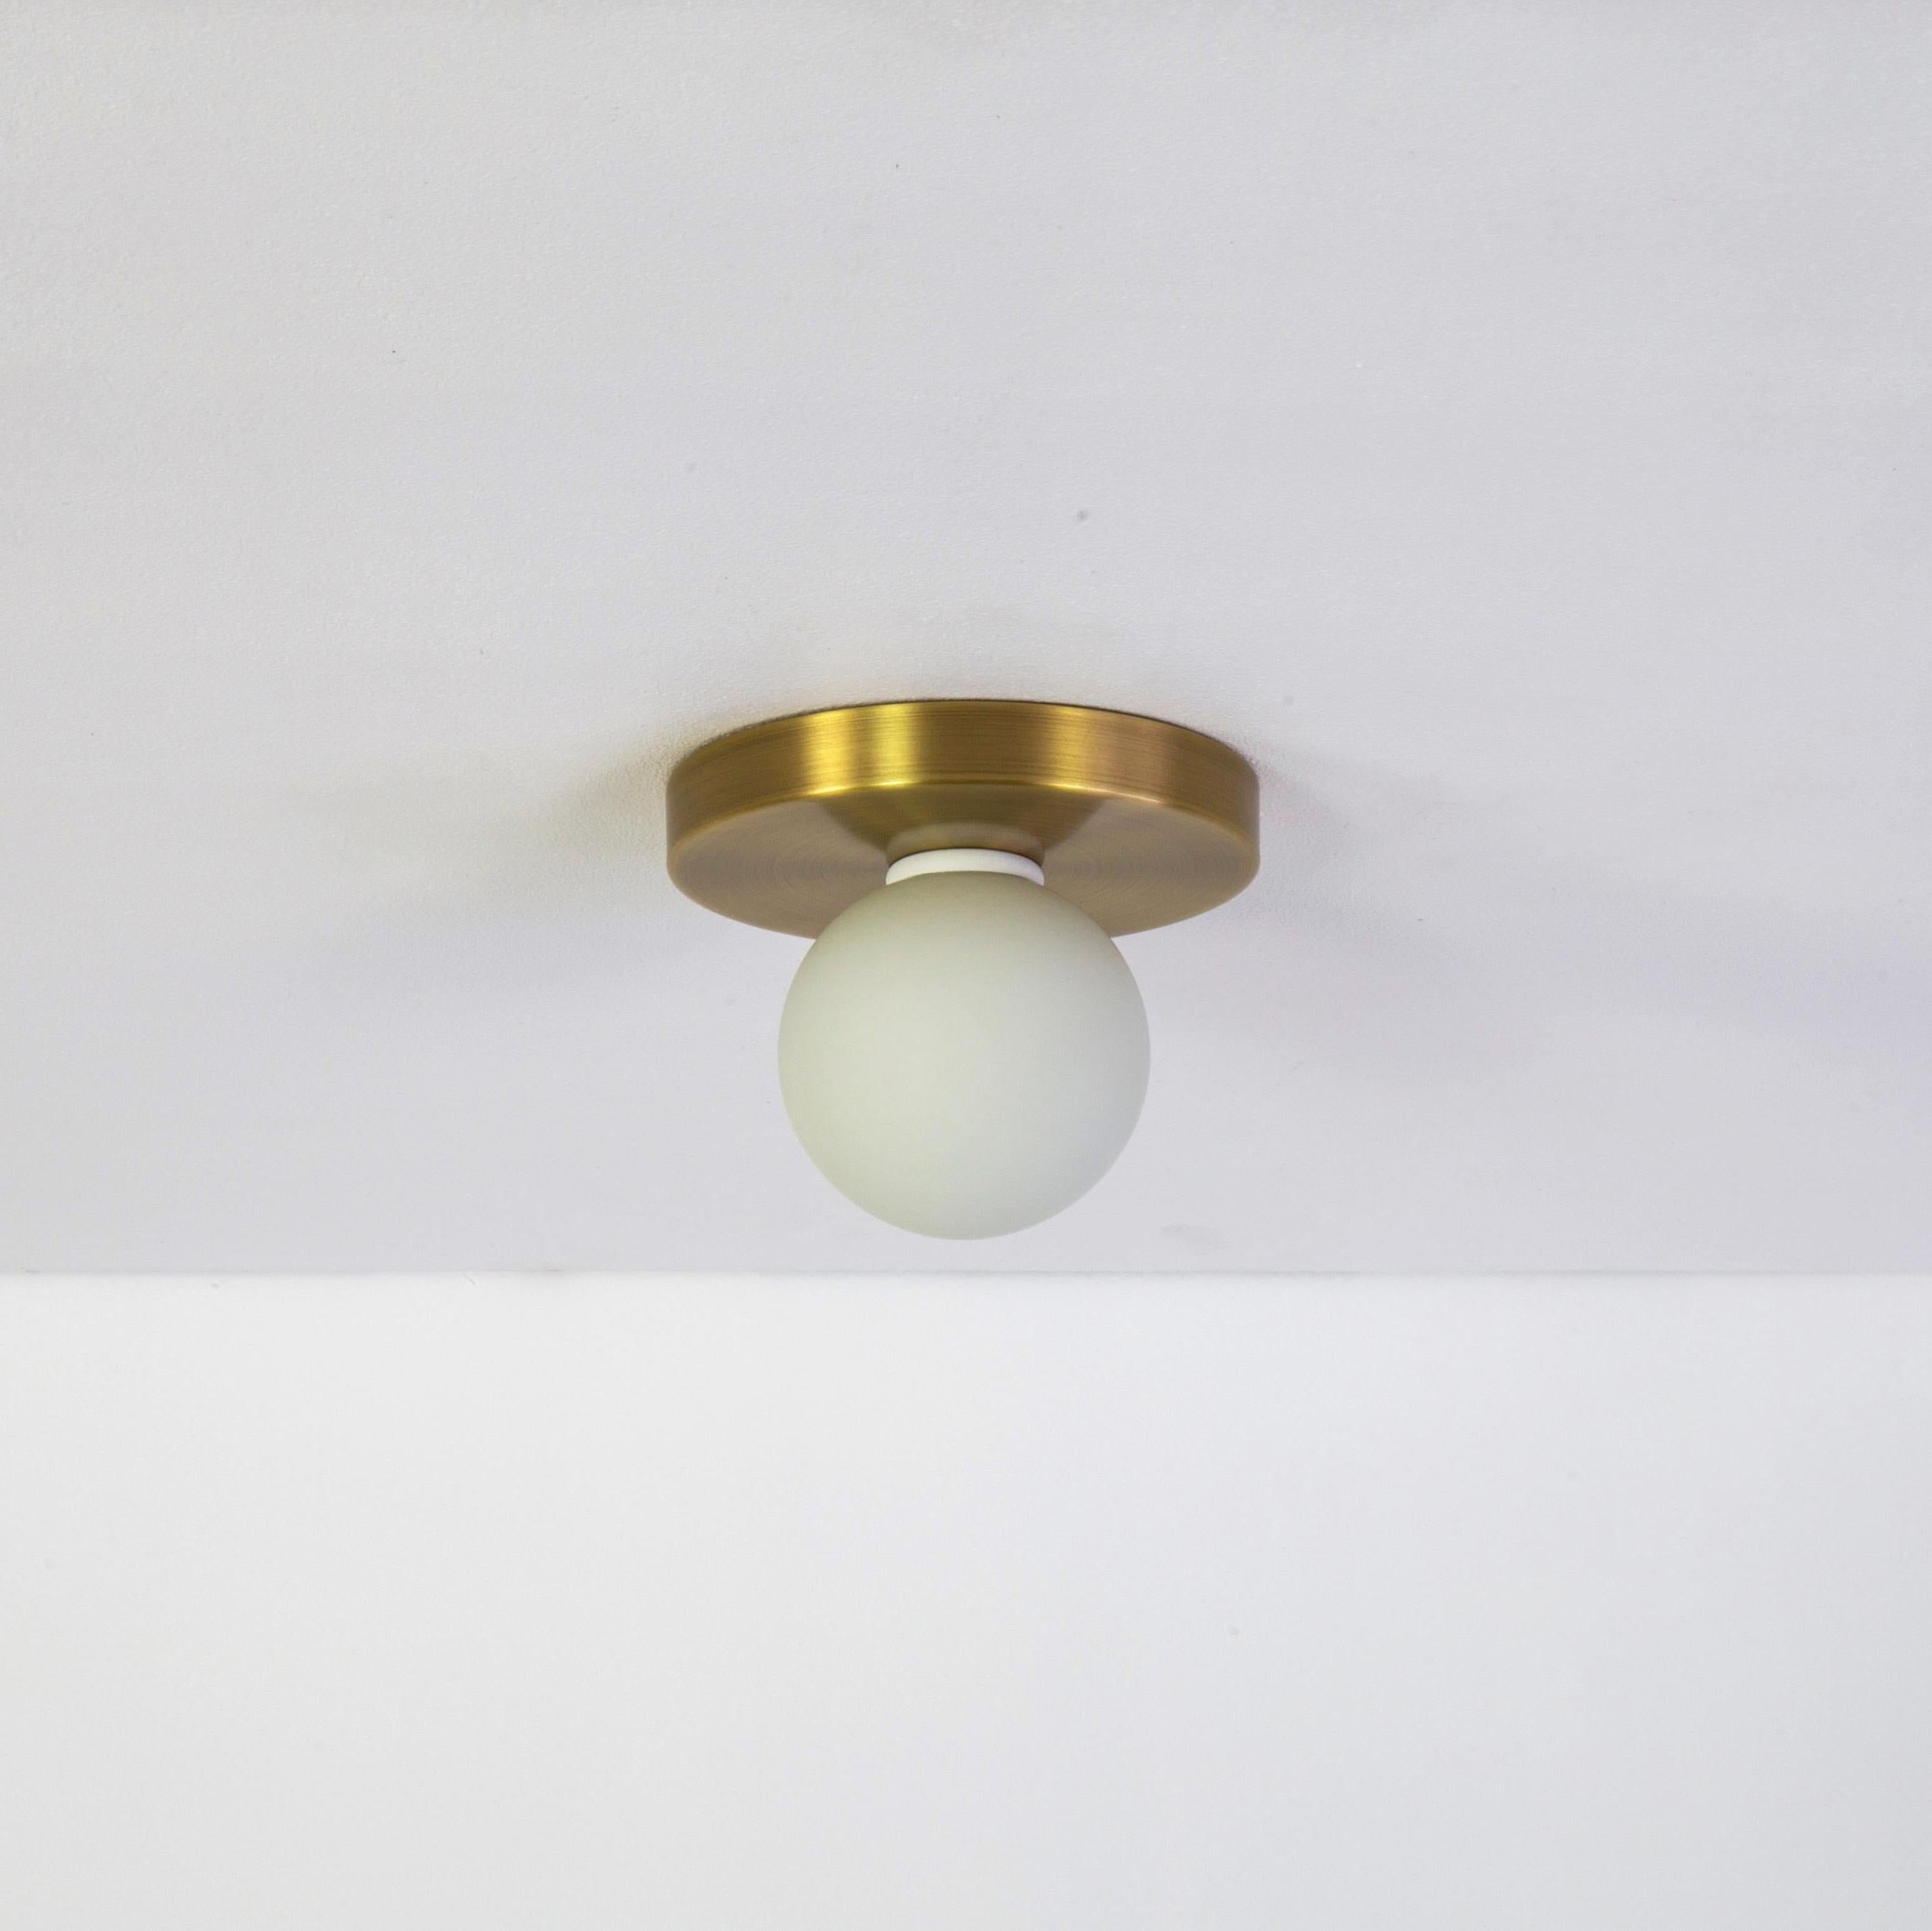 American Pair of Globe Flush Mounts by Research.Lighting, Brushed Brass, Made to Order For Sale